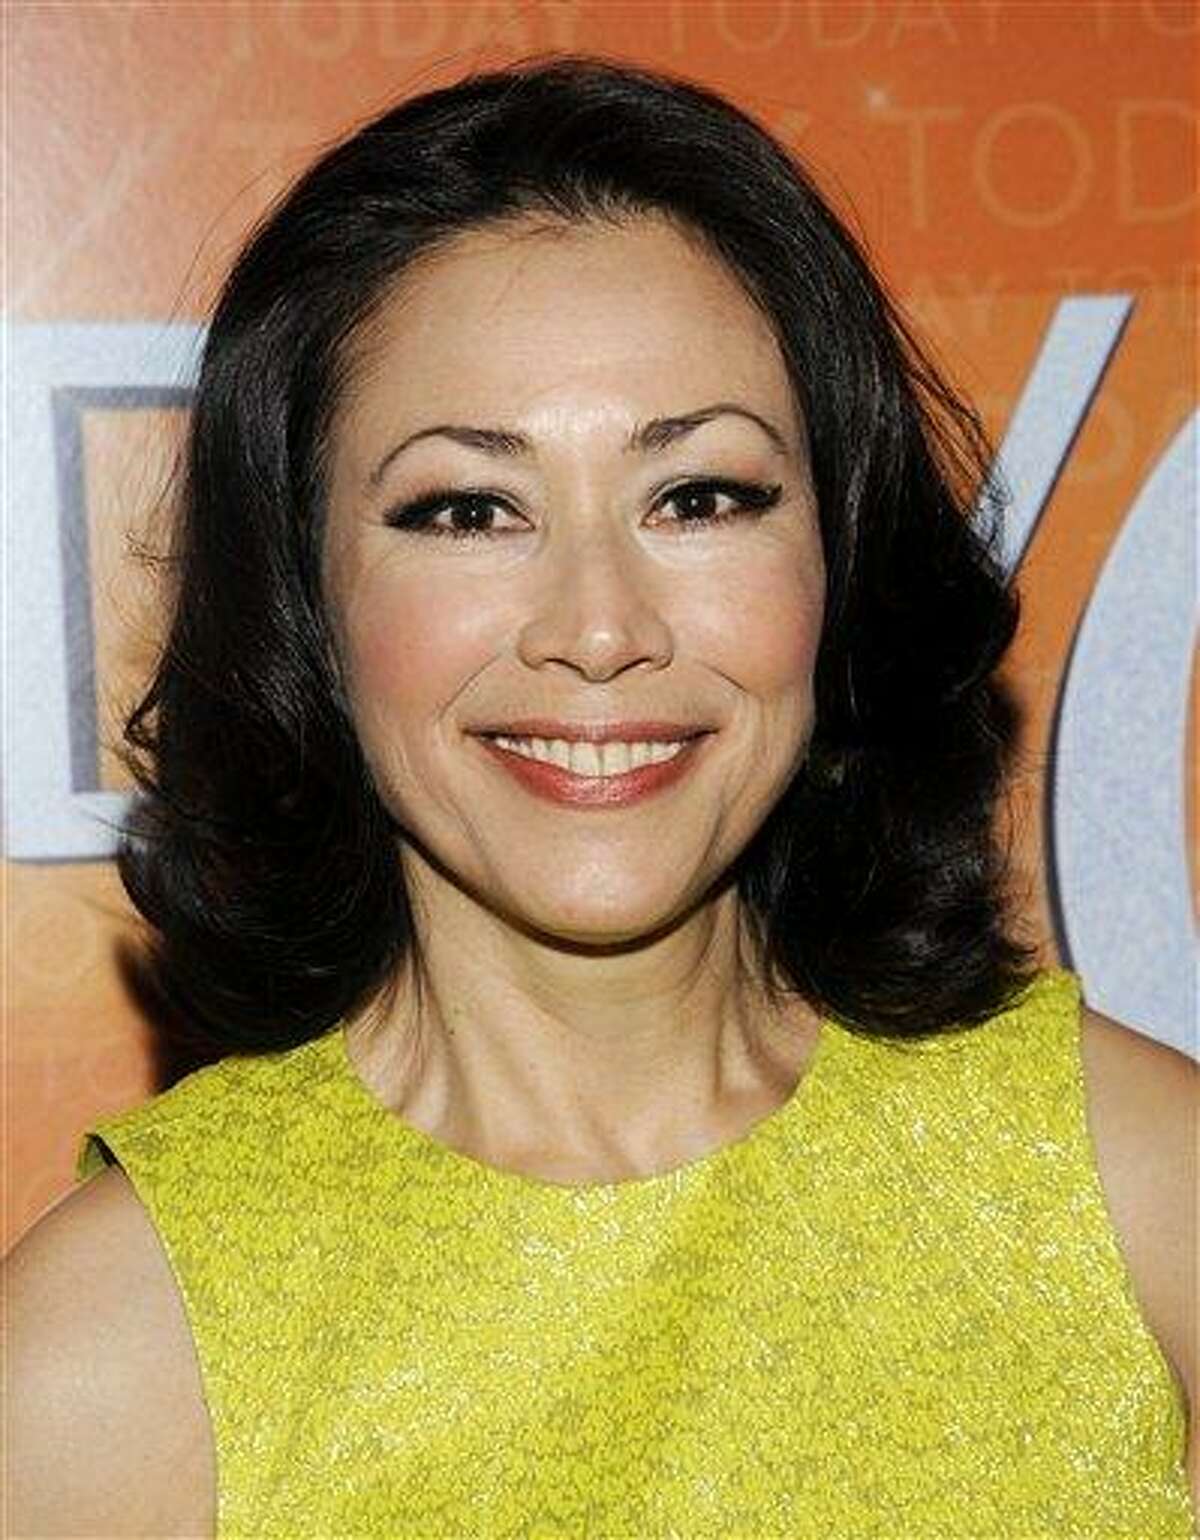 "Today" show co-host Ann Curry attends the "Today" show 60th anniversary celebration Jan. 12 at the Edison Ballroom in New York. Curry announced her departure after one year as co-host Thursday. NBC's Savannah Guthrie is expected to replace Curry. Associated Press